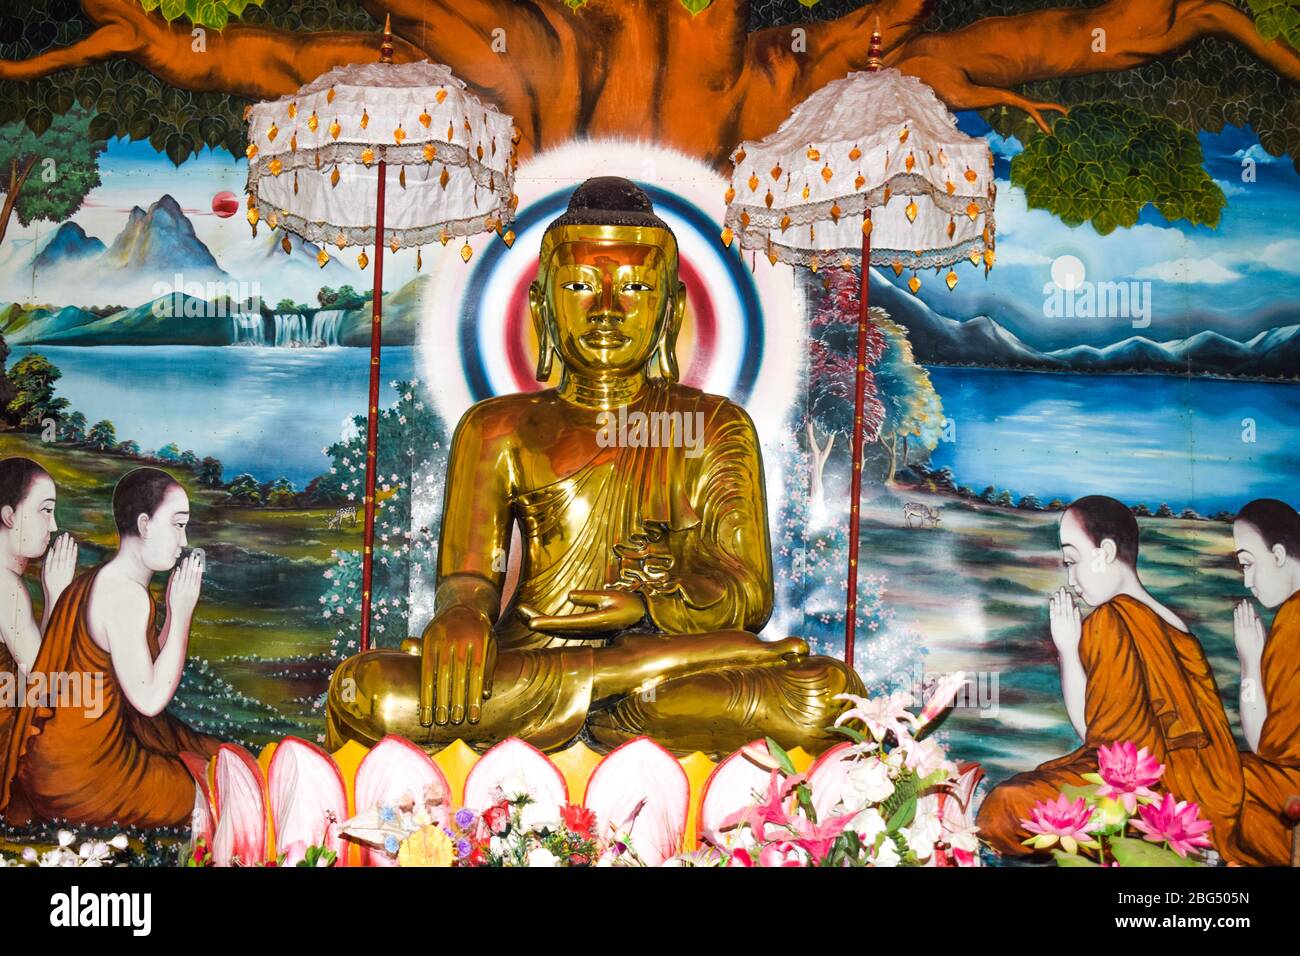 Statue made with real solid gold of gautama Buddha in a rural village for the worshipers Stock Photo